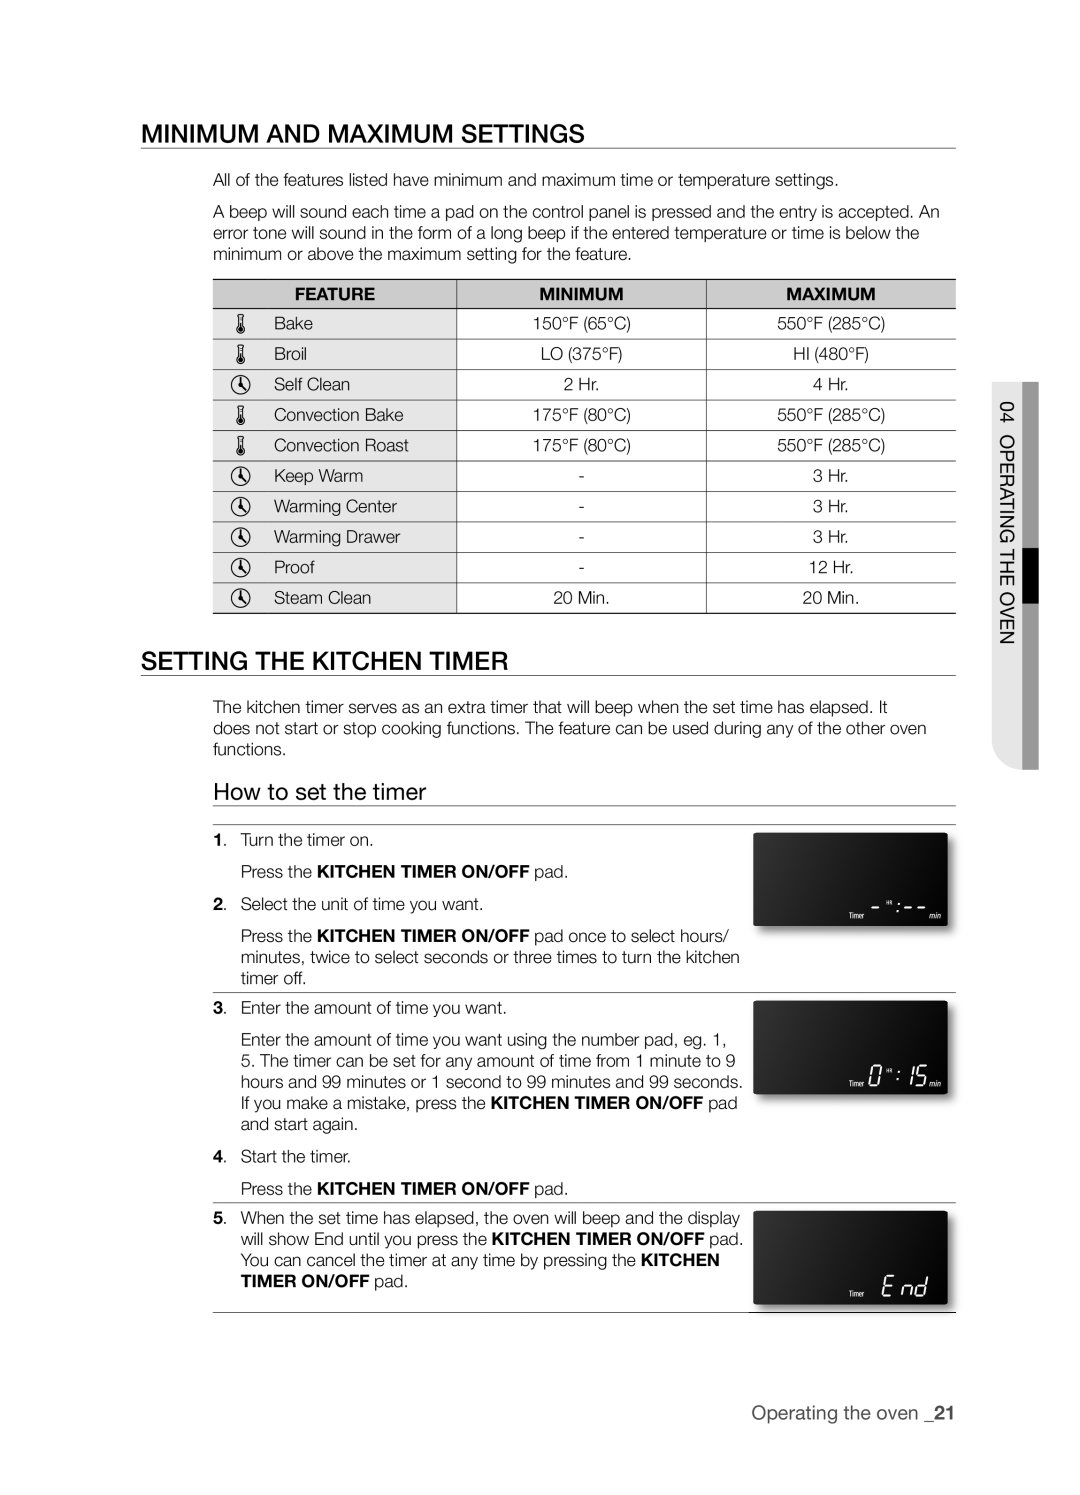 Samsung FTQ386LWX Minimum And Maximum Settings, Setting The Kitchen Timer, How to set the timer, Operating The Oven 